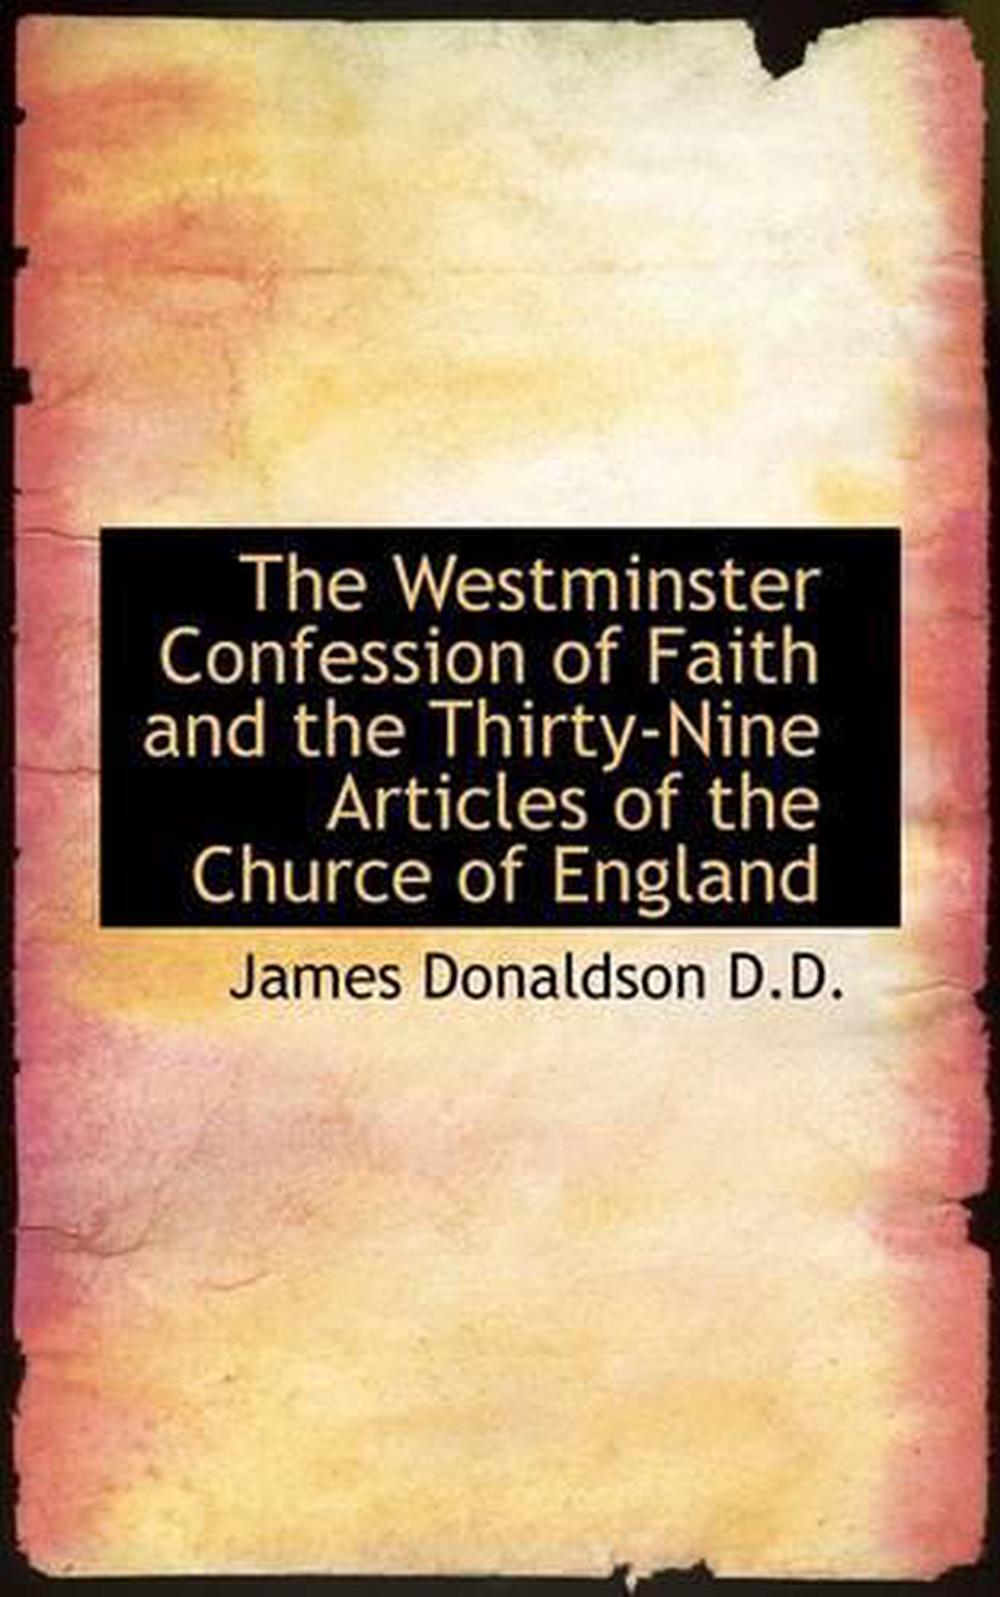 Westminster Confession of Faith and the ThirtyNine Articles by James